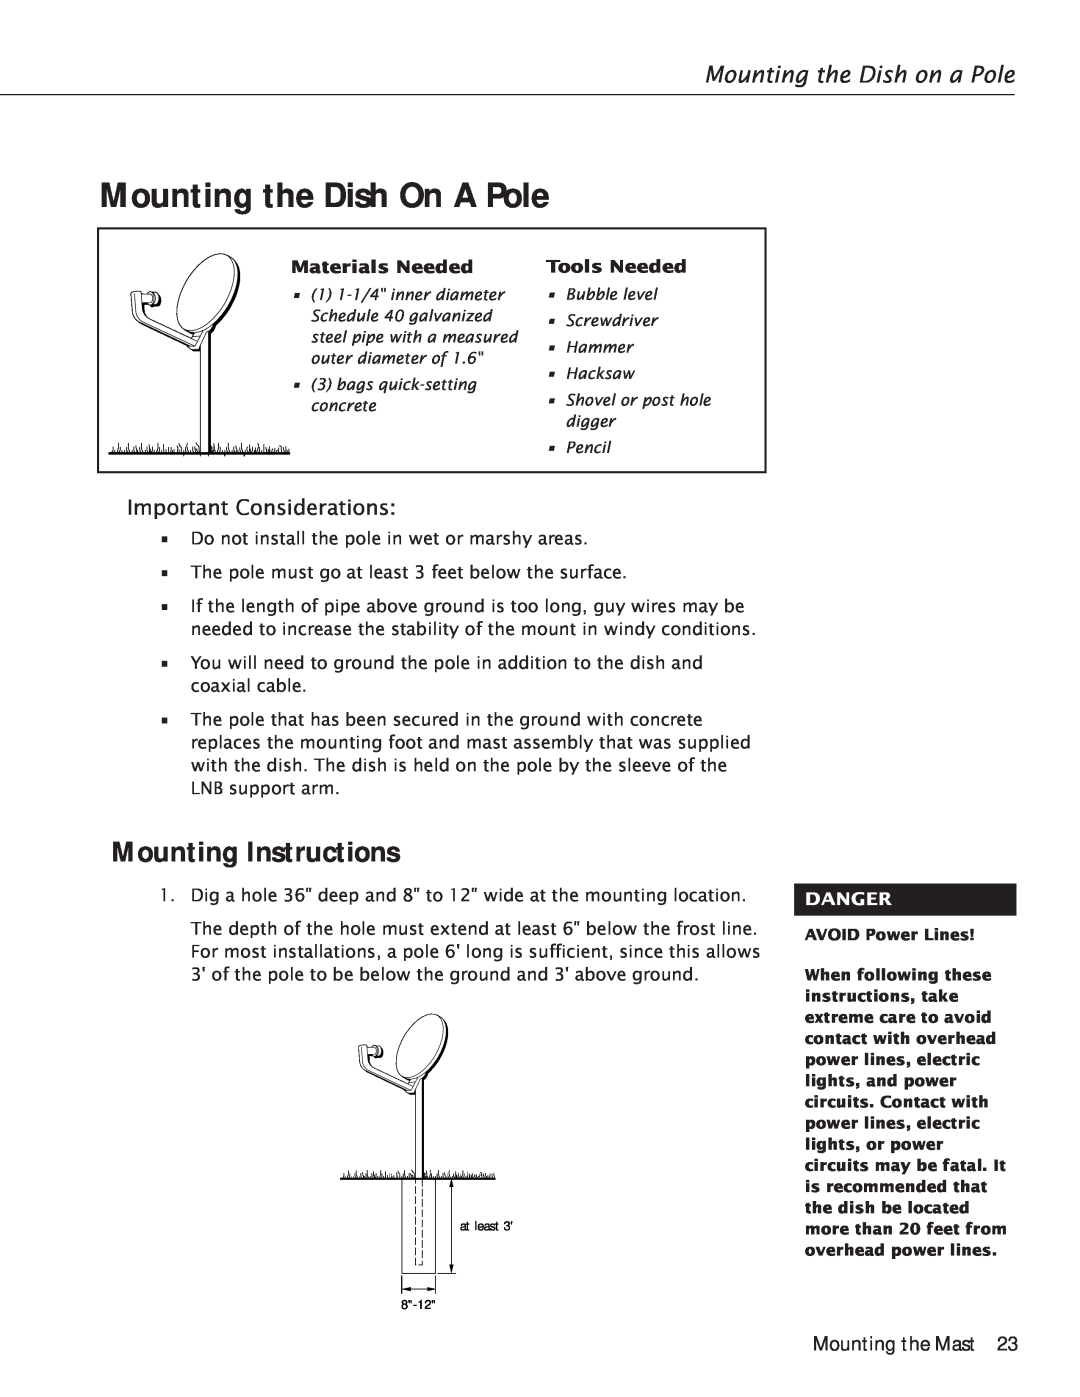 RCA Satellite TV Antenna manual Mounting the Dish On A Pole, Mounting the Dish on a Pole, Important Considerations, Danger 